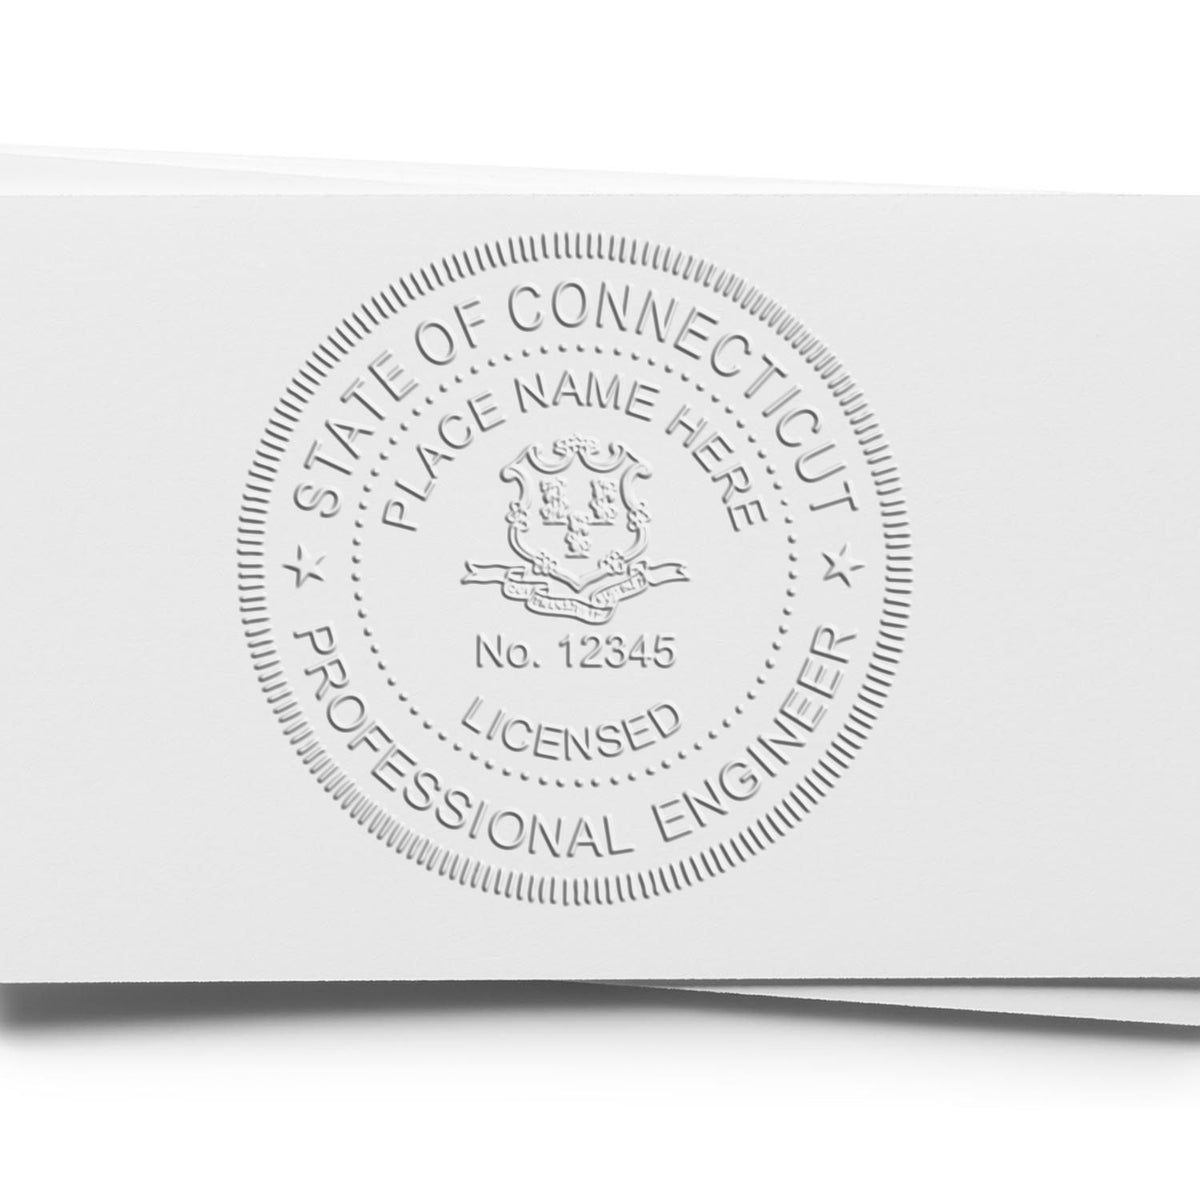 A photograph of the Long Reach Connecticut PE Seal stamp impression reveals a vivid, professional image of the on paper.